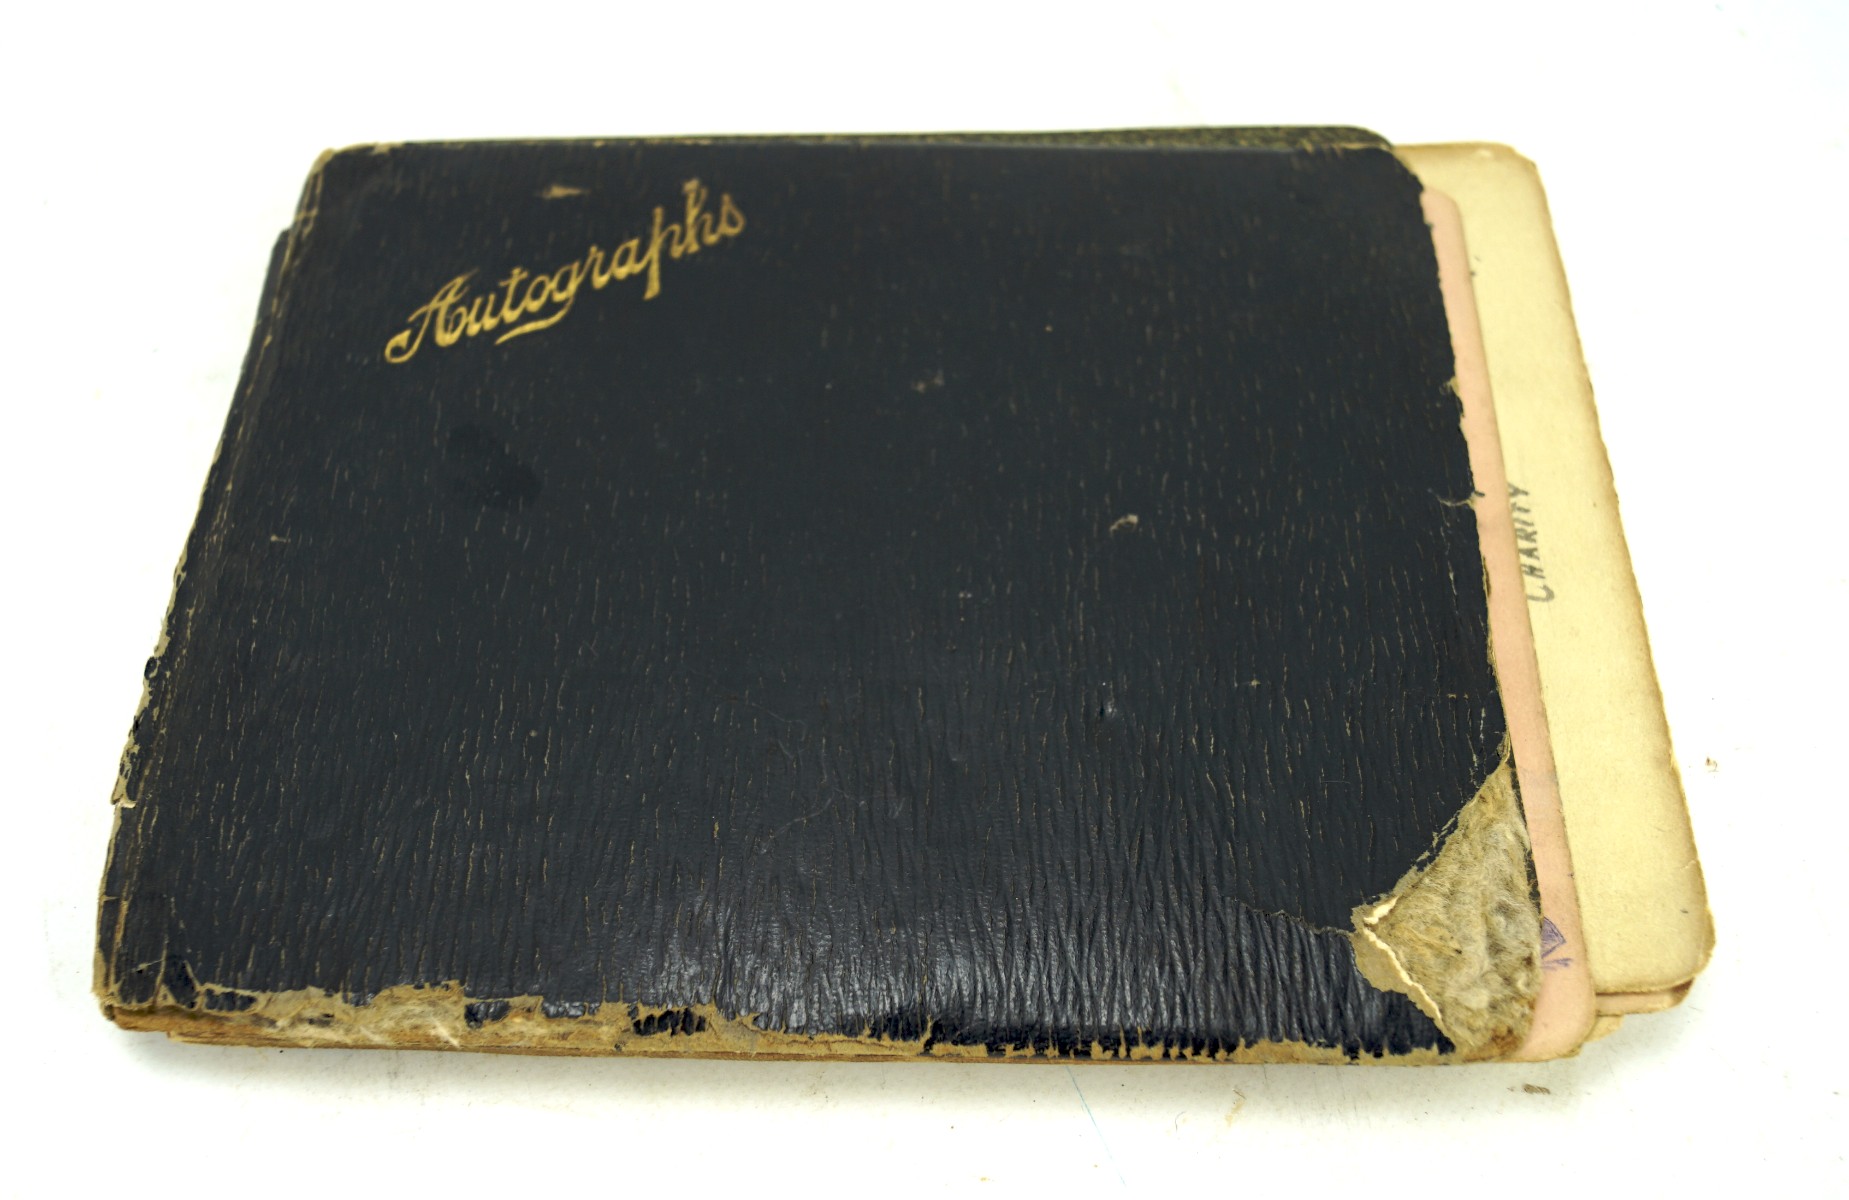 An early 20th century autograph book,